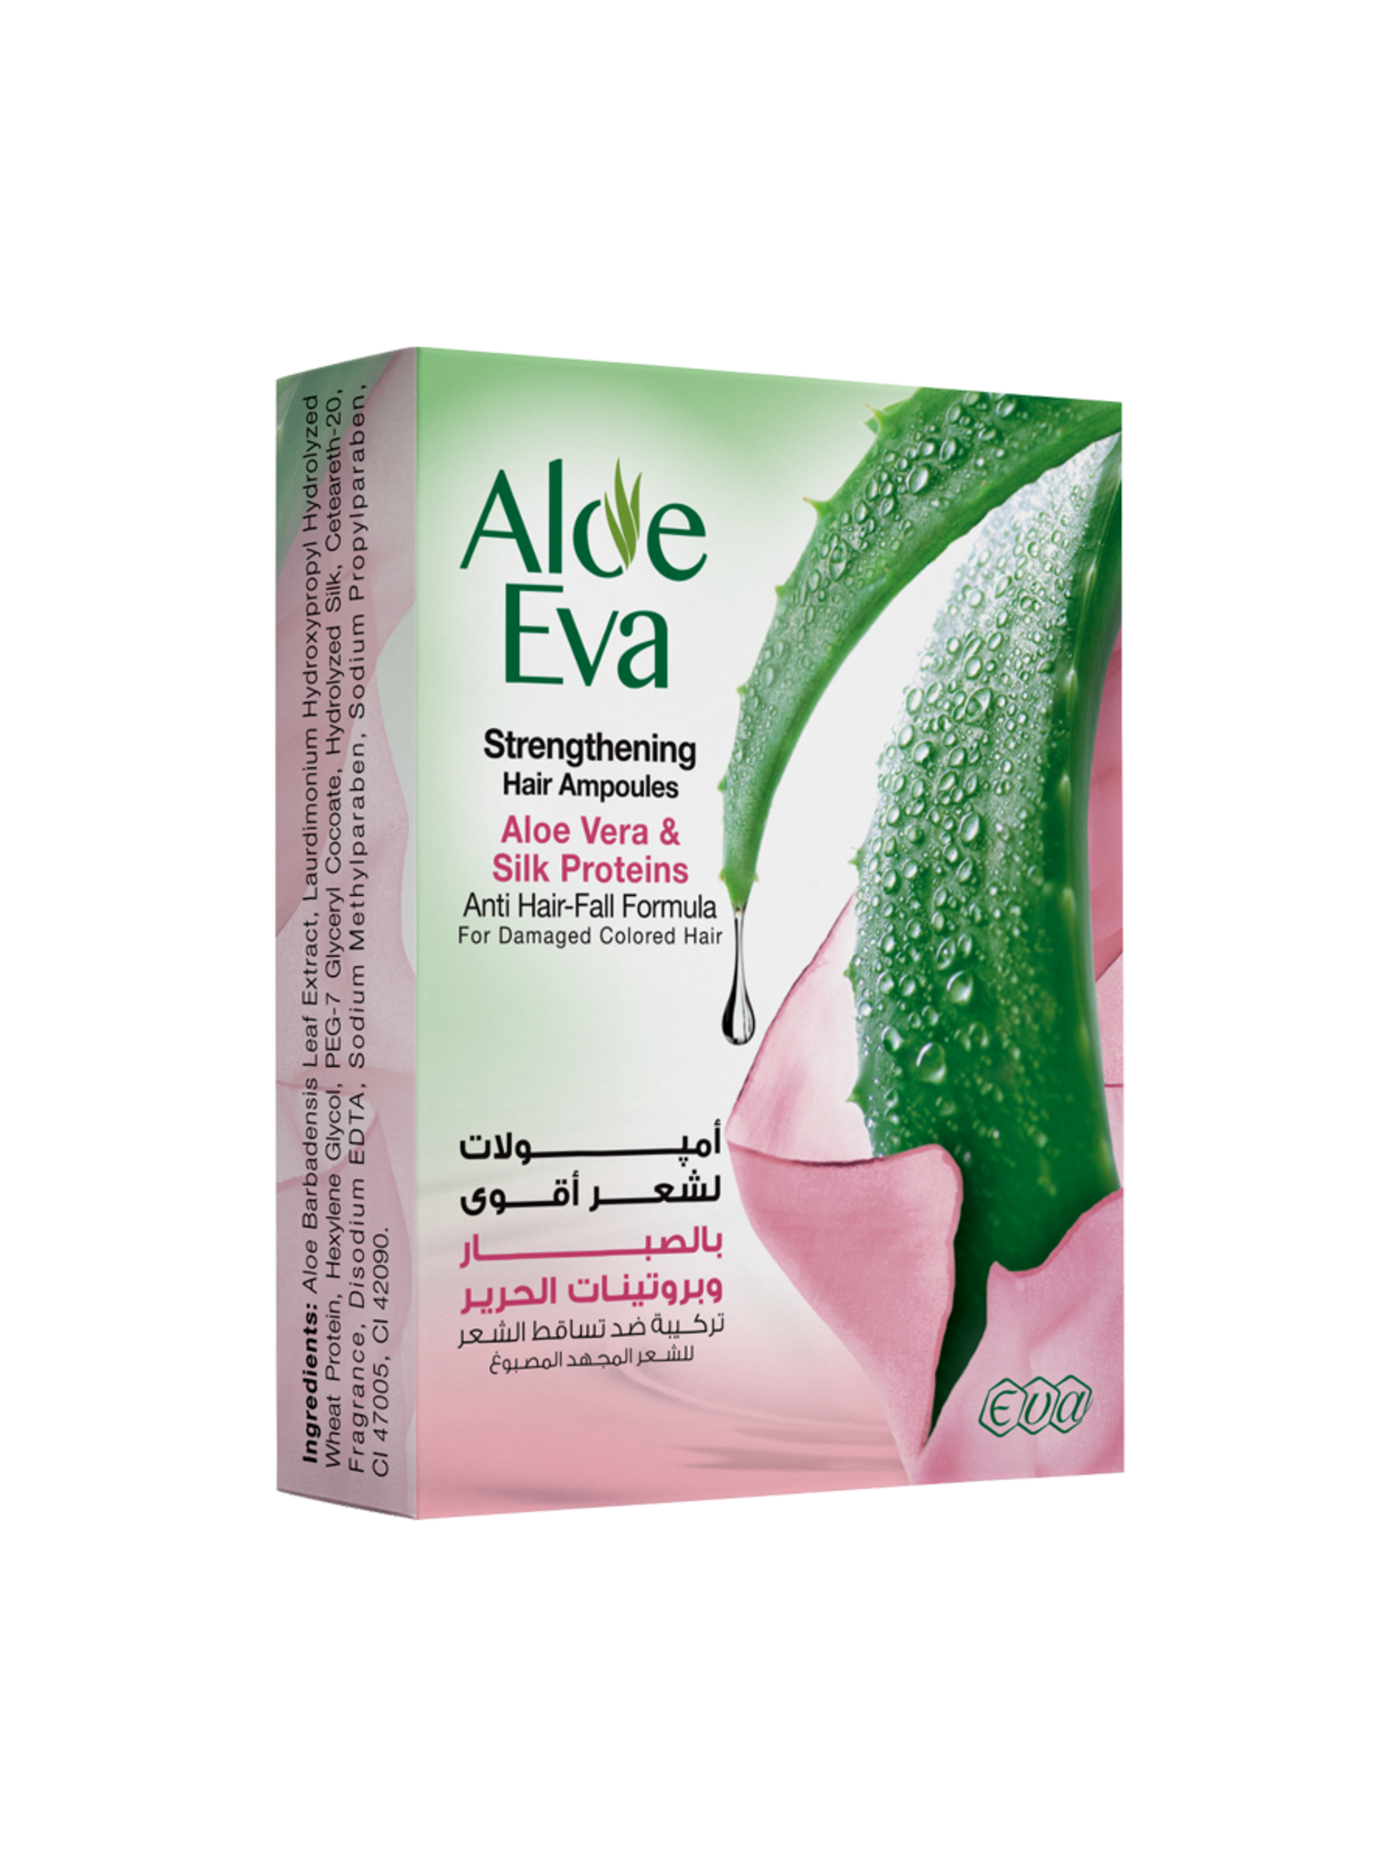 Hair Ampoules Aloe Eva with Aloe Vera and Silk Proteins